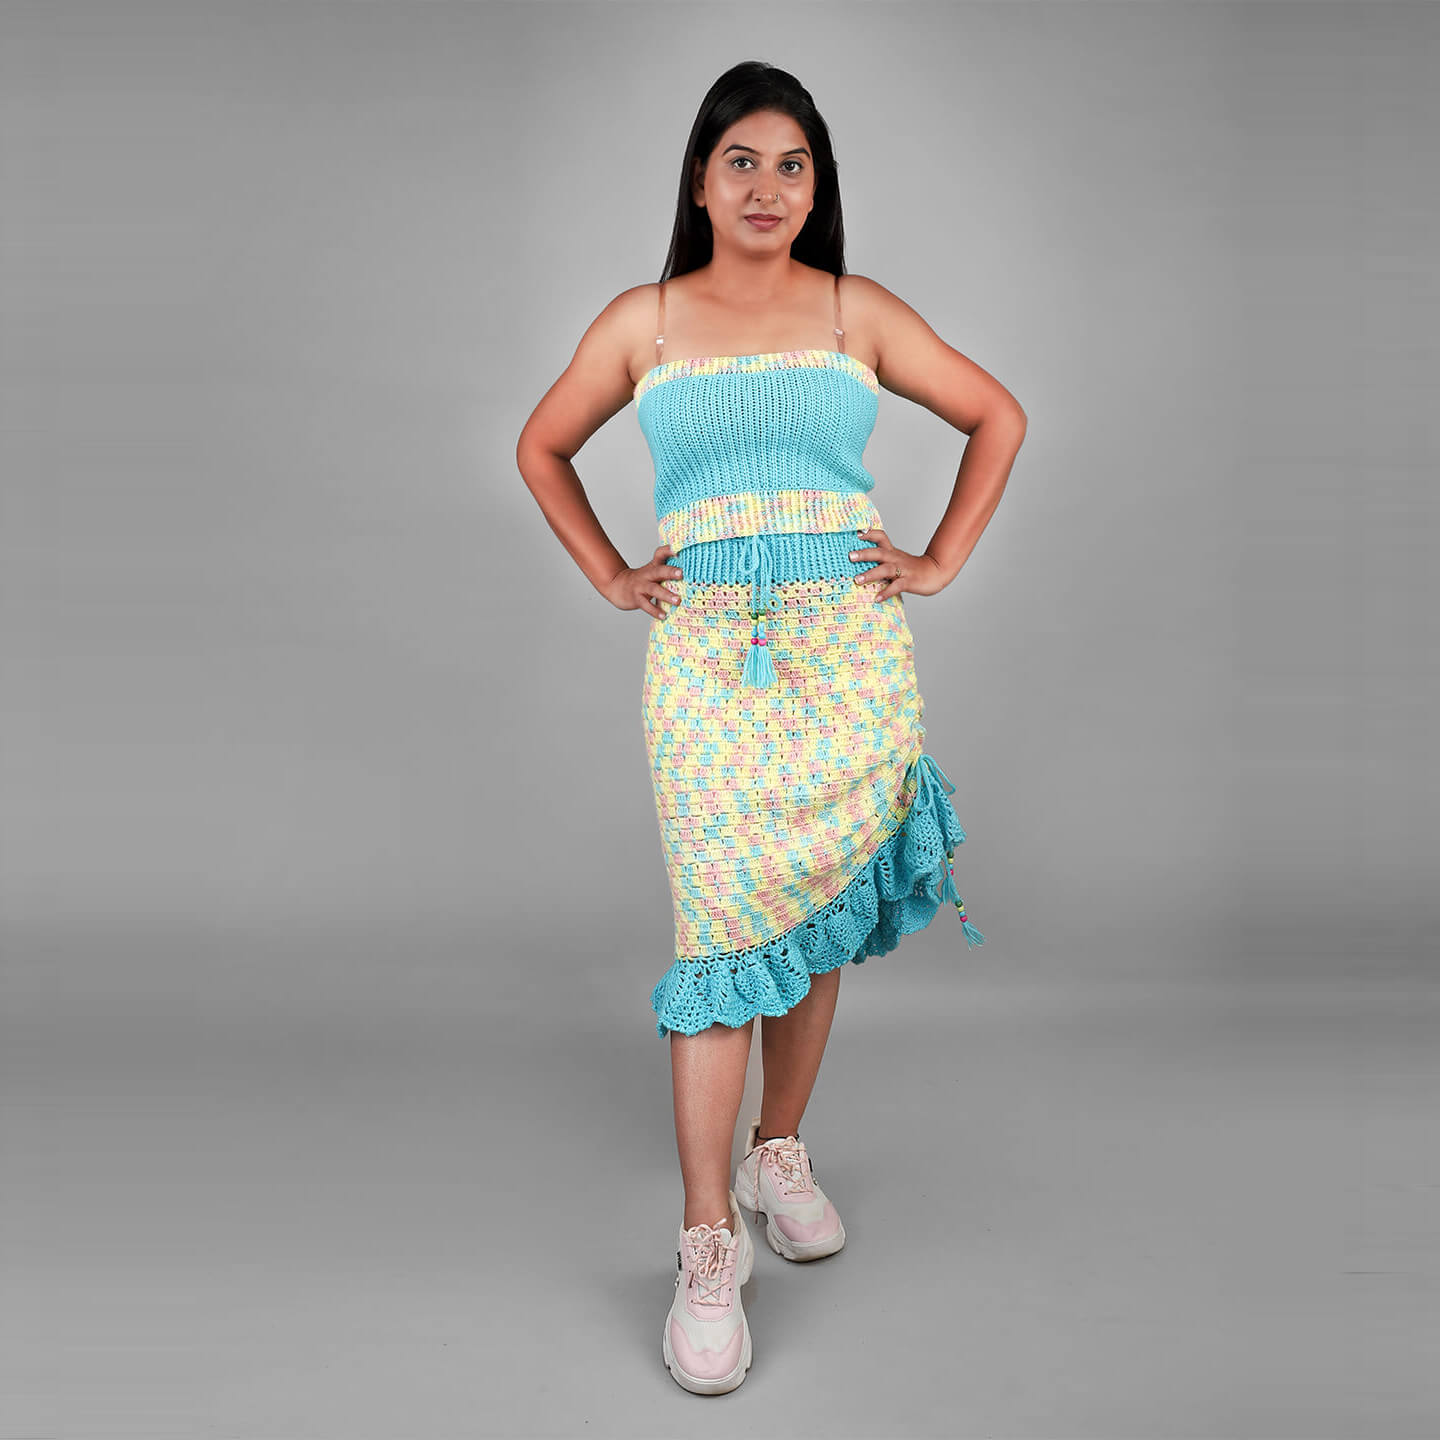 Handmade Multi Color Top and Skirt - 3125